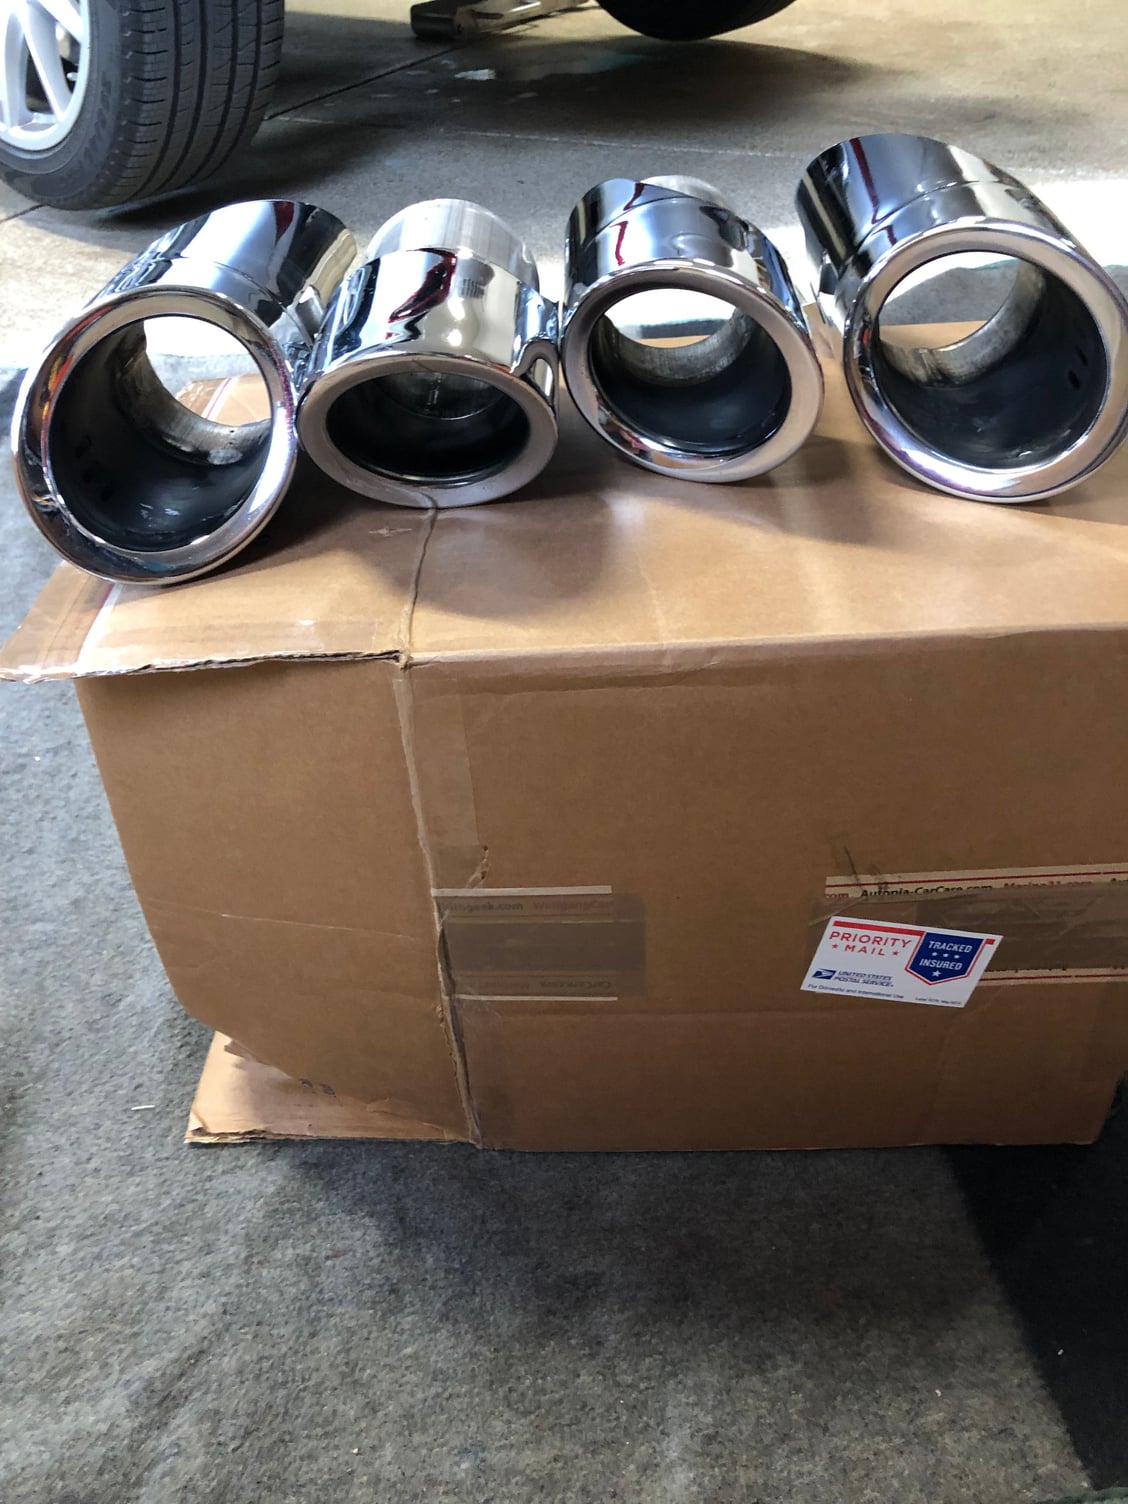 Engine - Exhaust - Macan Turbo OEM Sport tailpipes (chrome) - Used - 2015 to 2018 Porsche Macan - St. Charles, IL 60175, United States